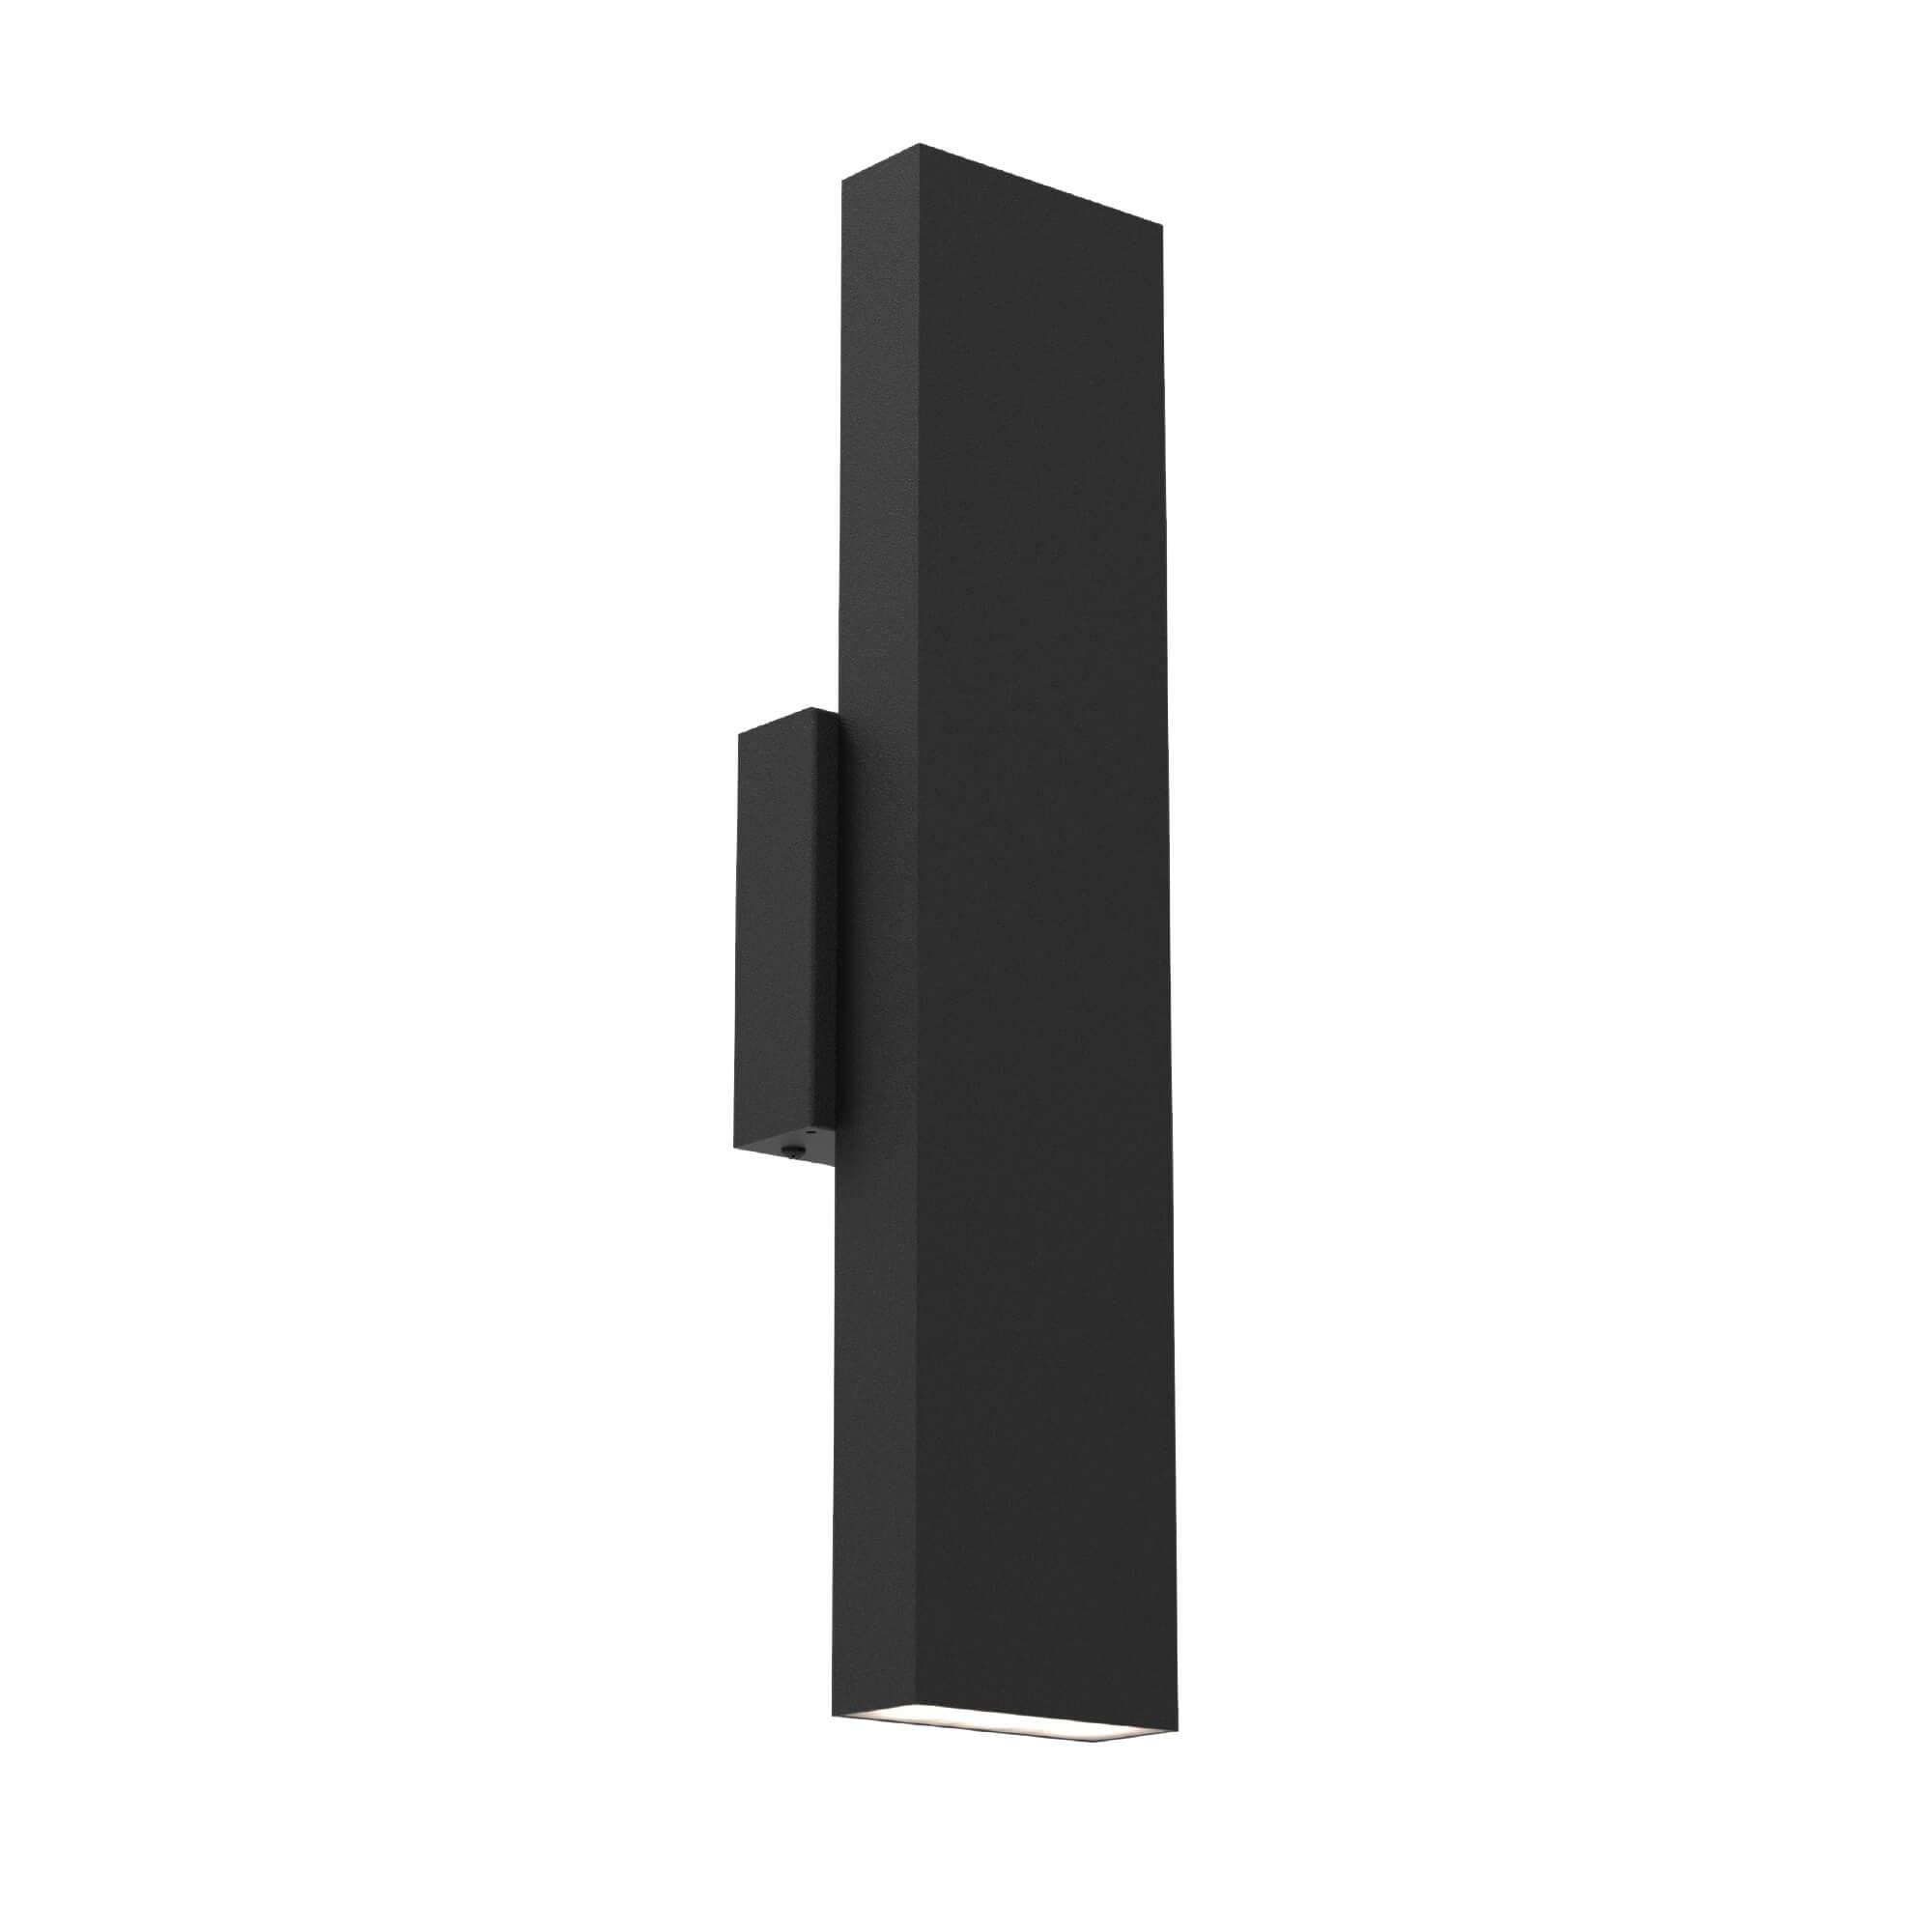 DALS Lighting - MSL Series LED Wall Sconce - MSLWALL-CC-BK | Montreal Lighting & Hardware